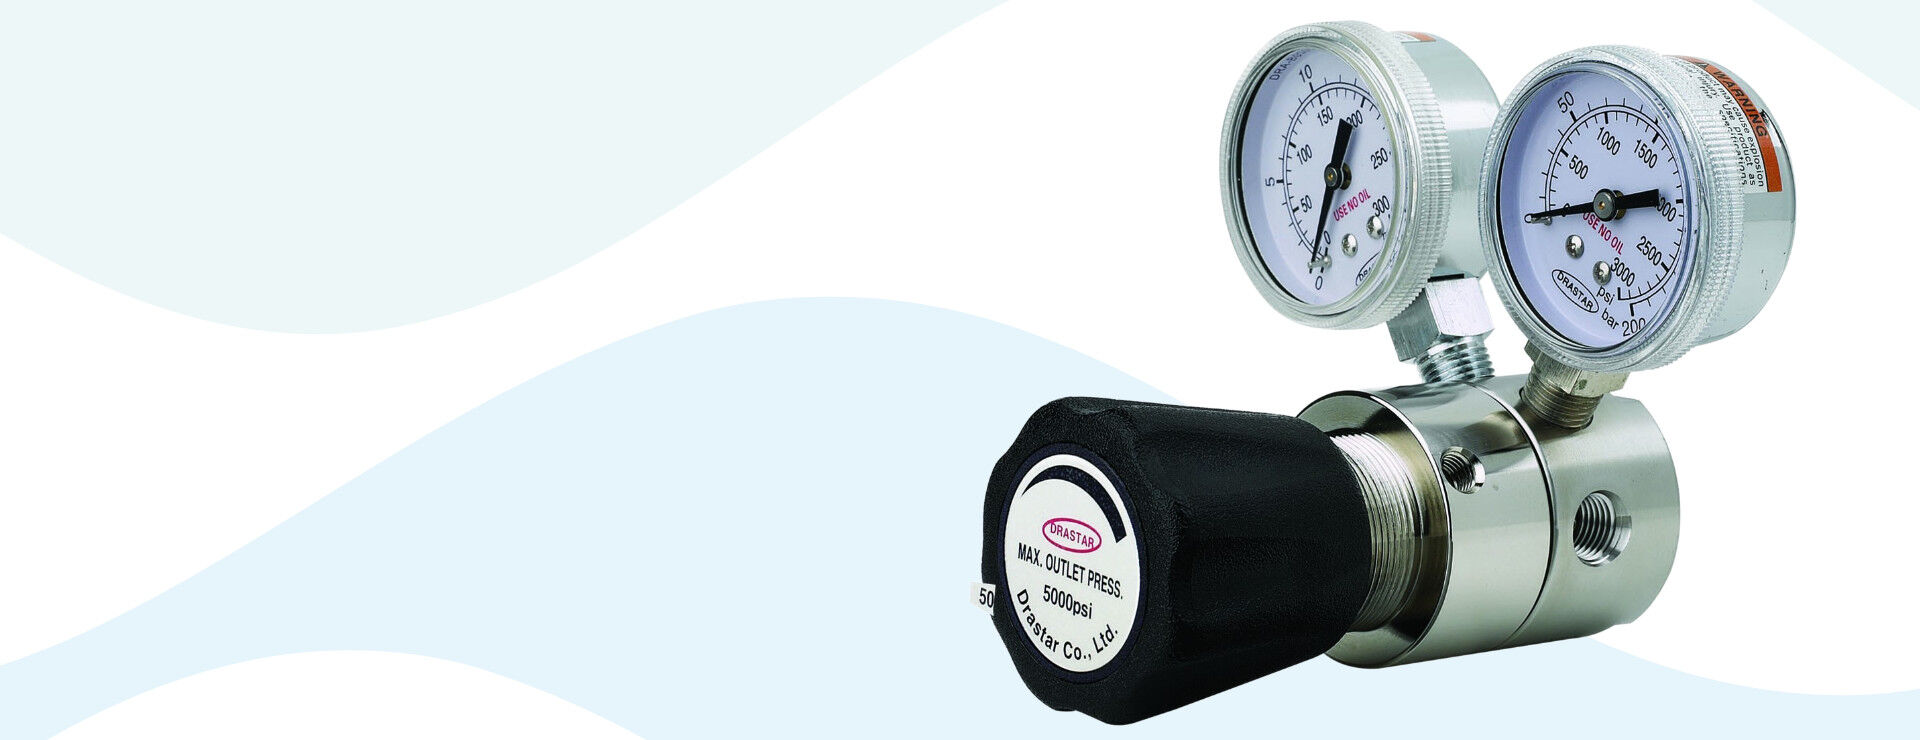 Learn how our meters work with minimal pressure drop